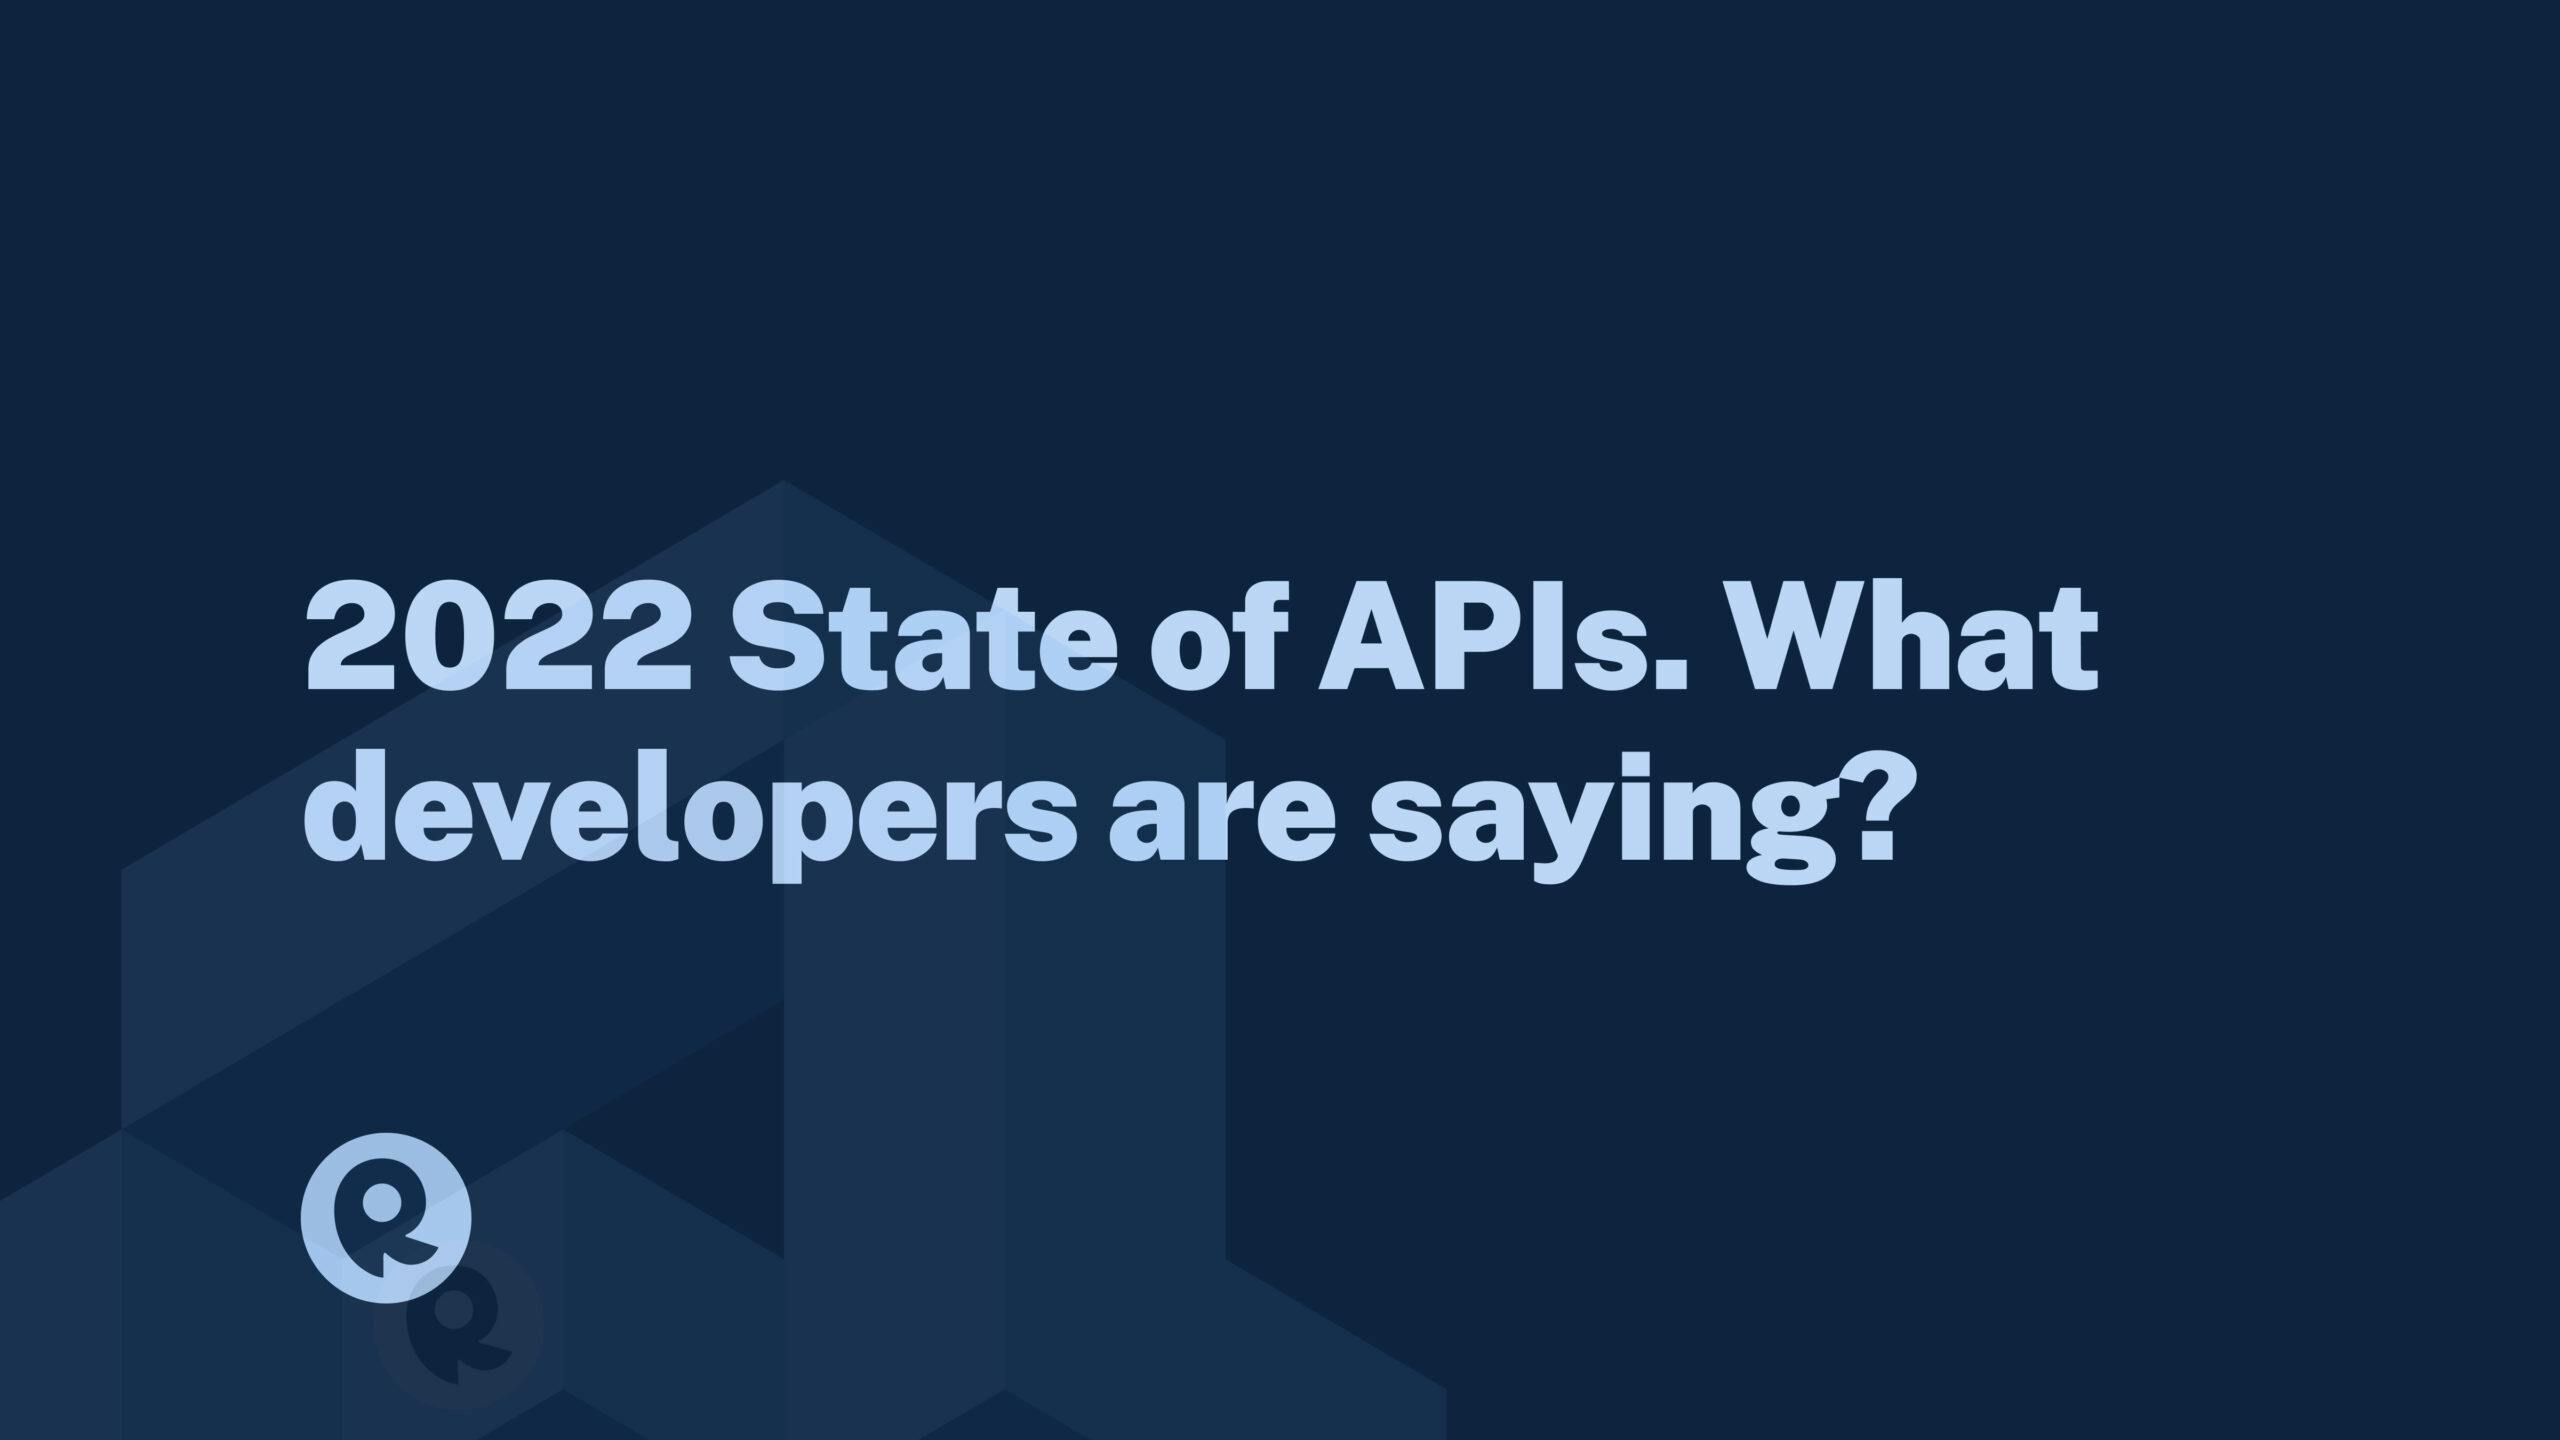 2022 State of APIs. What developers are saying?